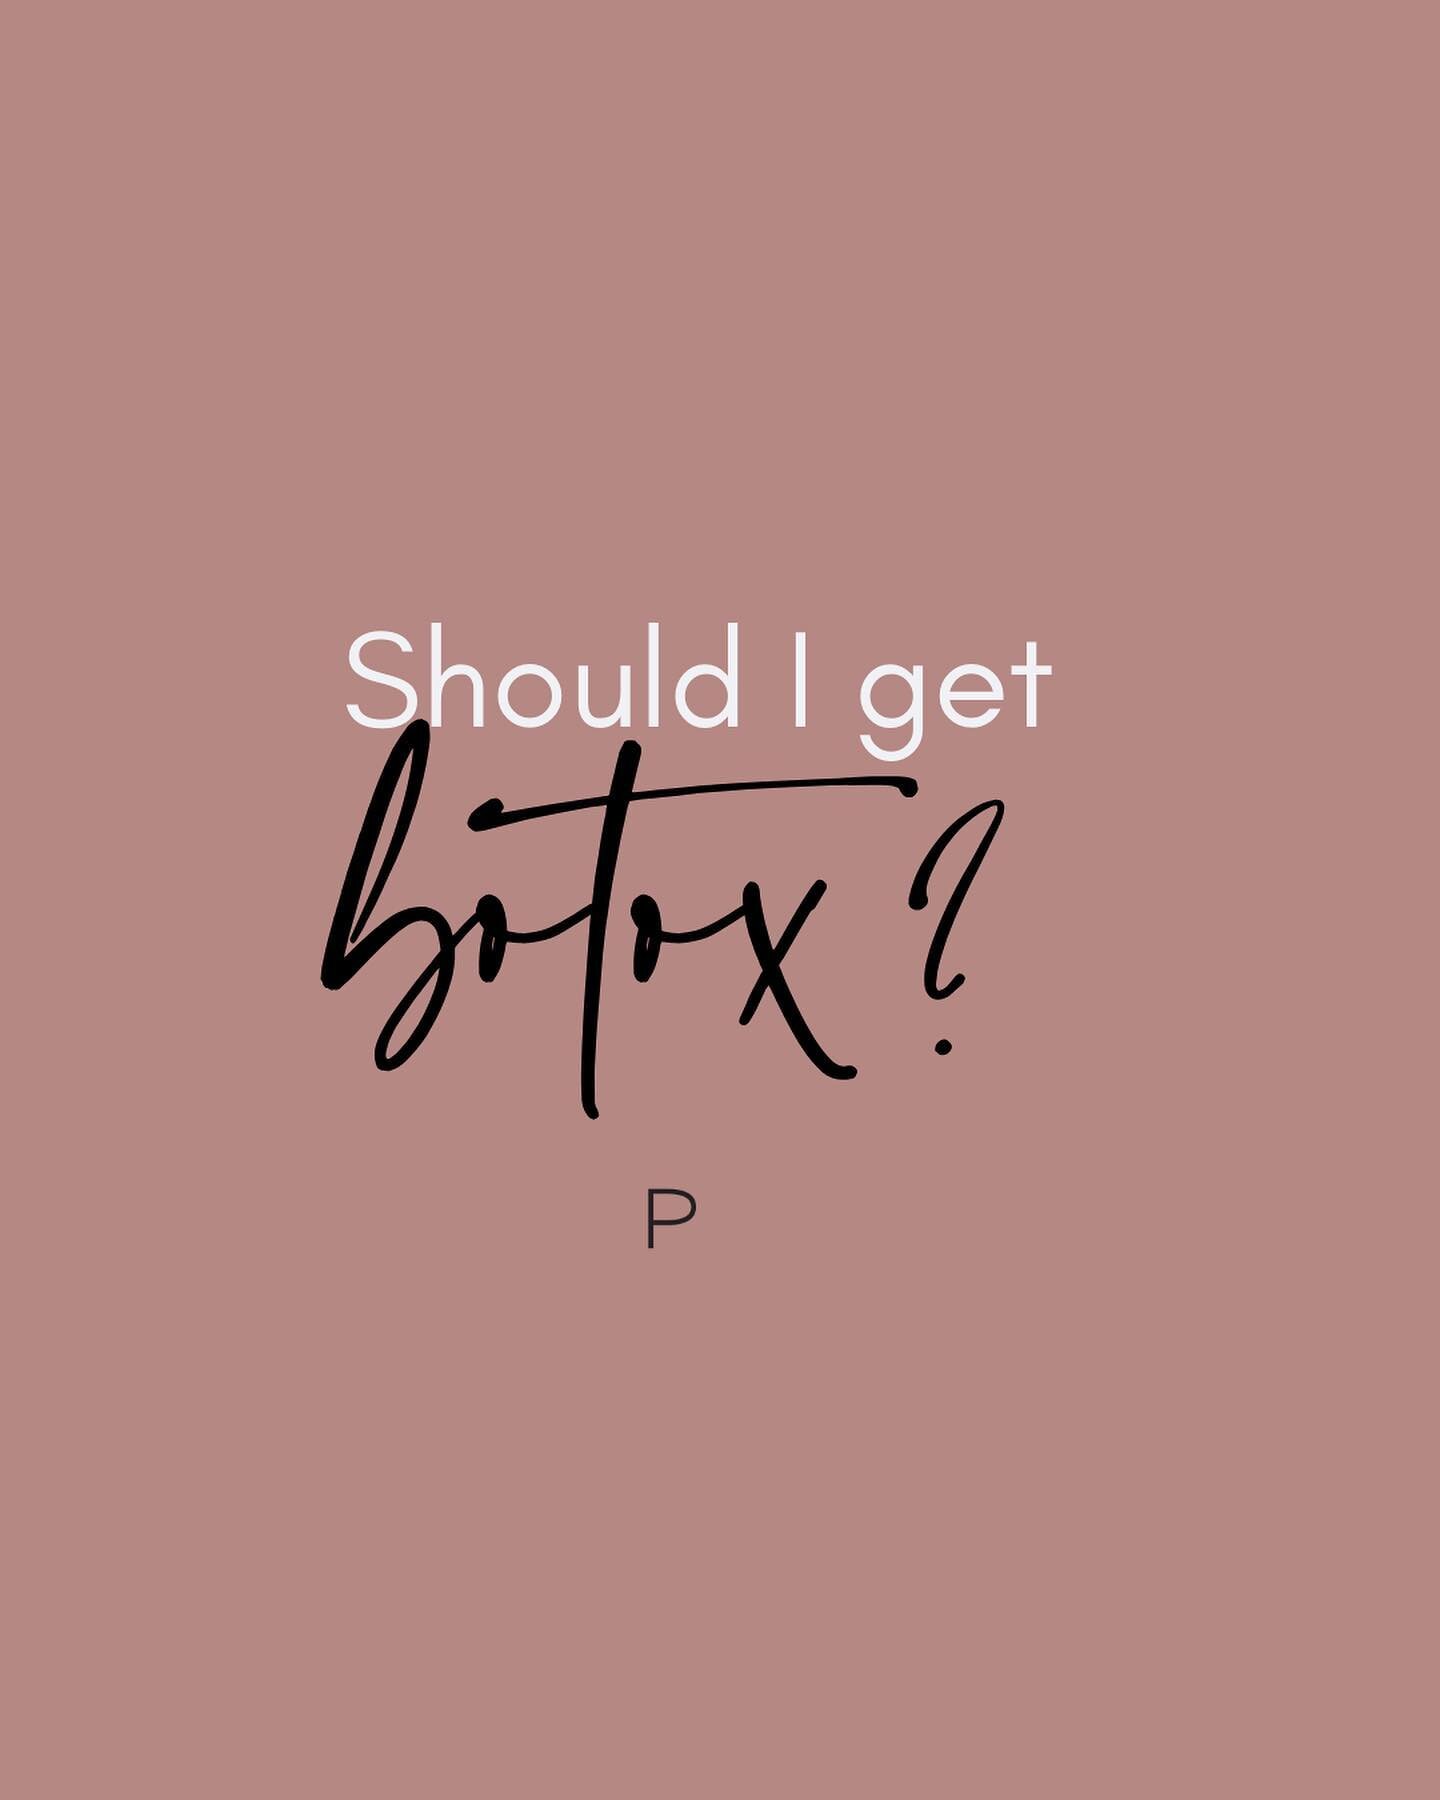 When it comes to our personal decisions about injections, why do we judge each other so much? 

&ldquo;For me, it&rsquo;s empowering. It&rsquo;s taken me years to finally accept myself, and to come into my own power. Botox didn&rsquo;t do that. I did